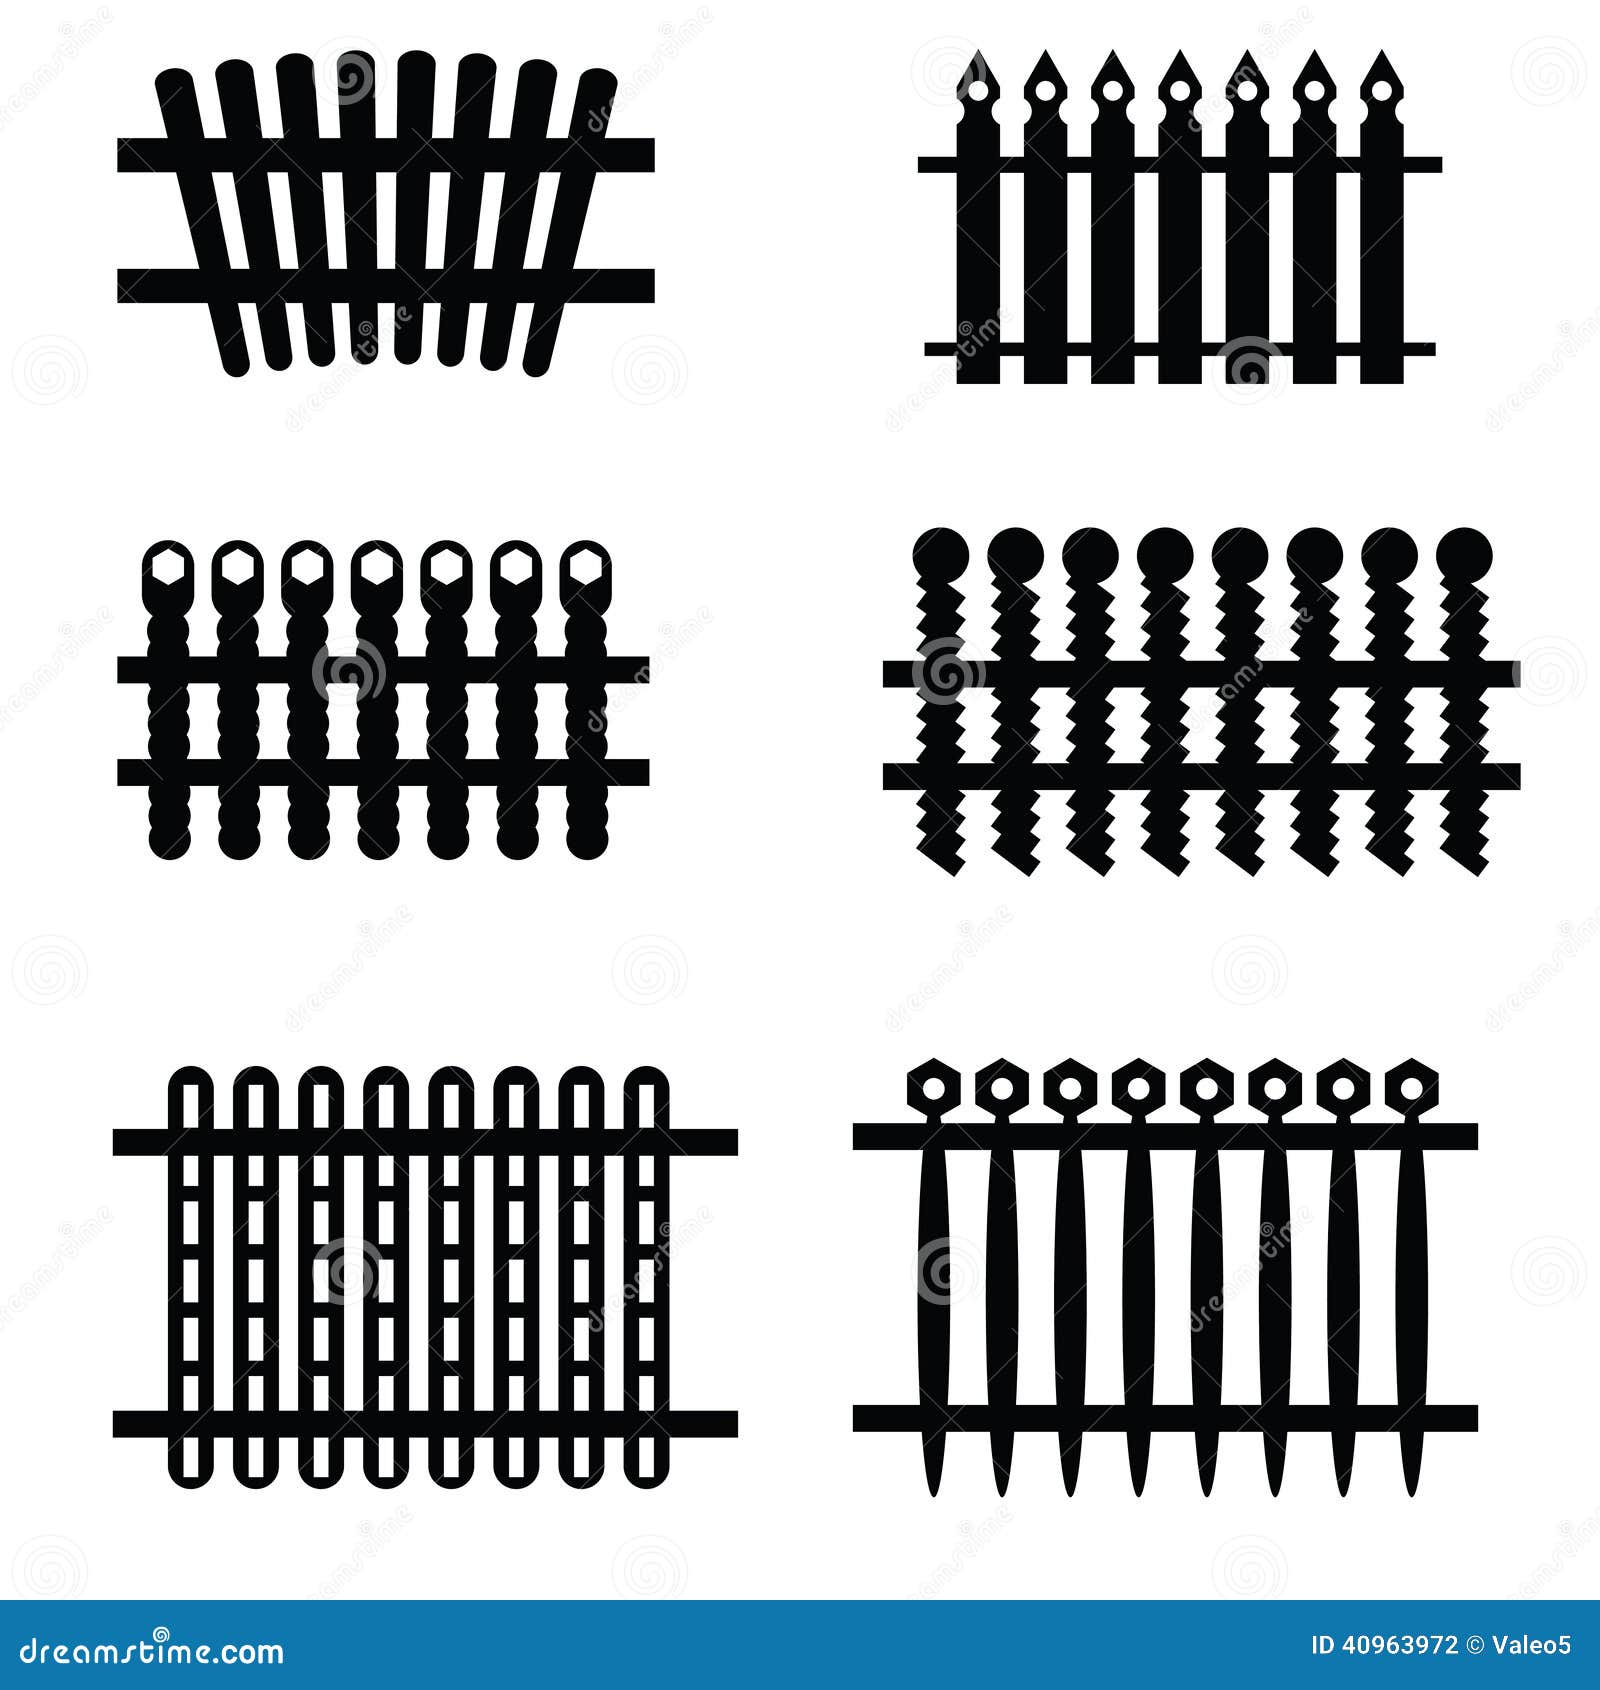 Silhouettes of fences stock vector. Illustration of hobnailed - 40963972